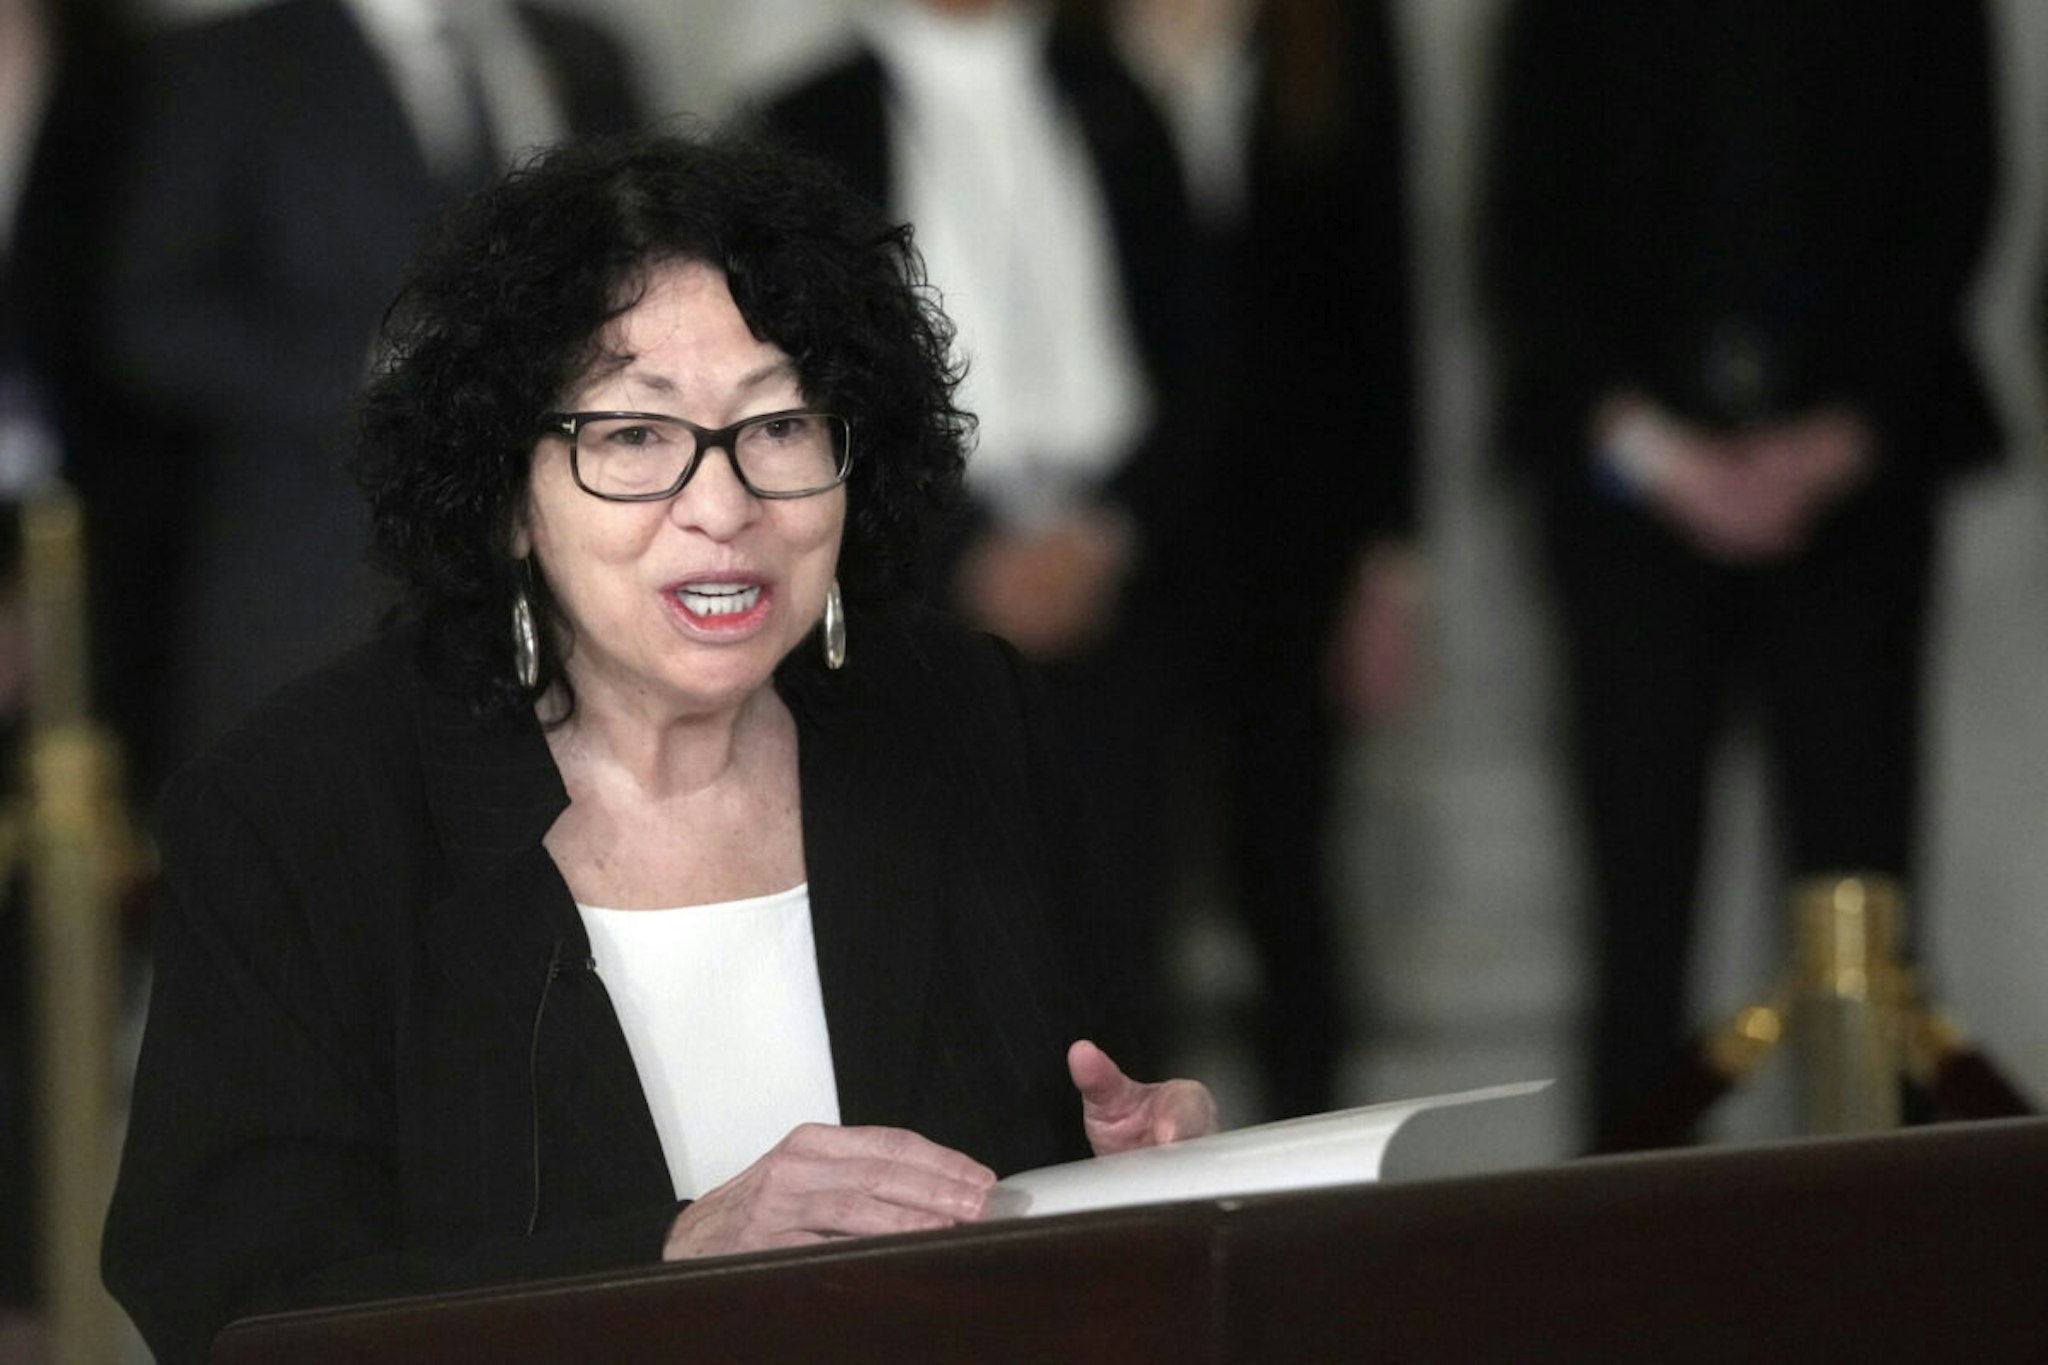 Supreme Court Justice Sonia Sotomayor speaks during a service for retired Supreme Court Justice Sandra Day O'Connor in the Great Hall at the Supreme Court in Washington, DC, on December 18, 2023.